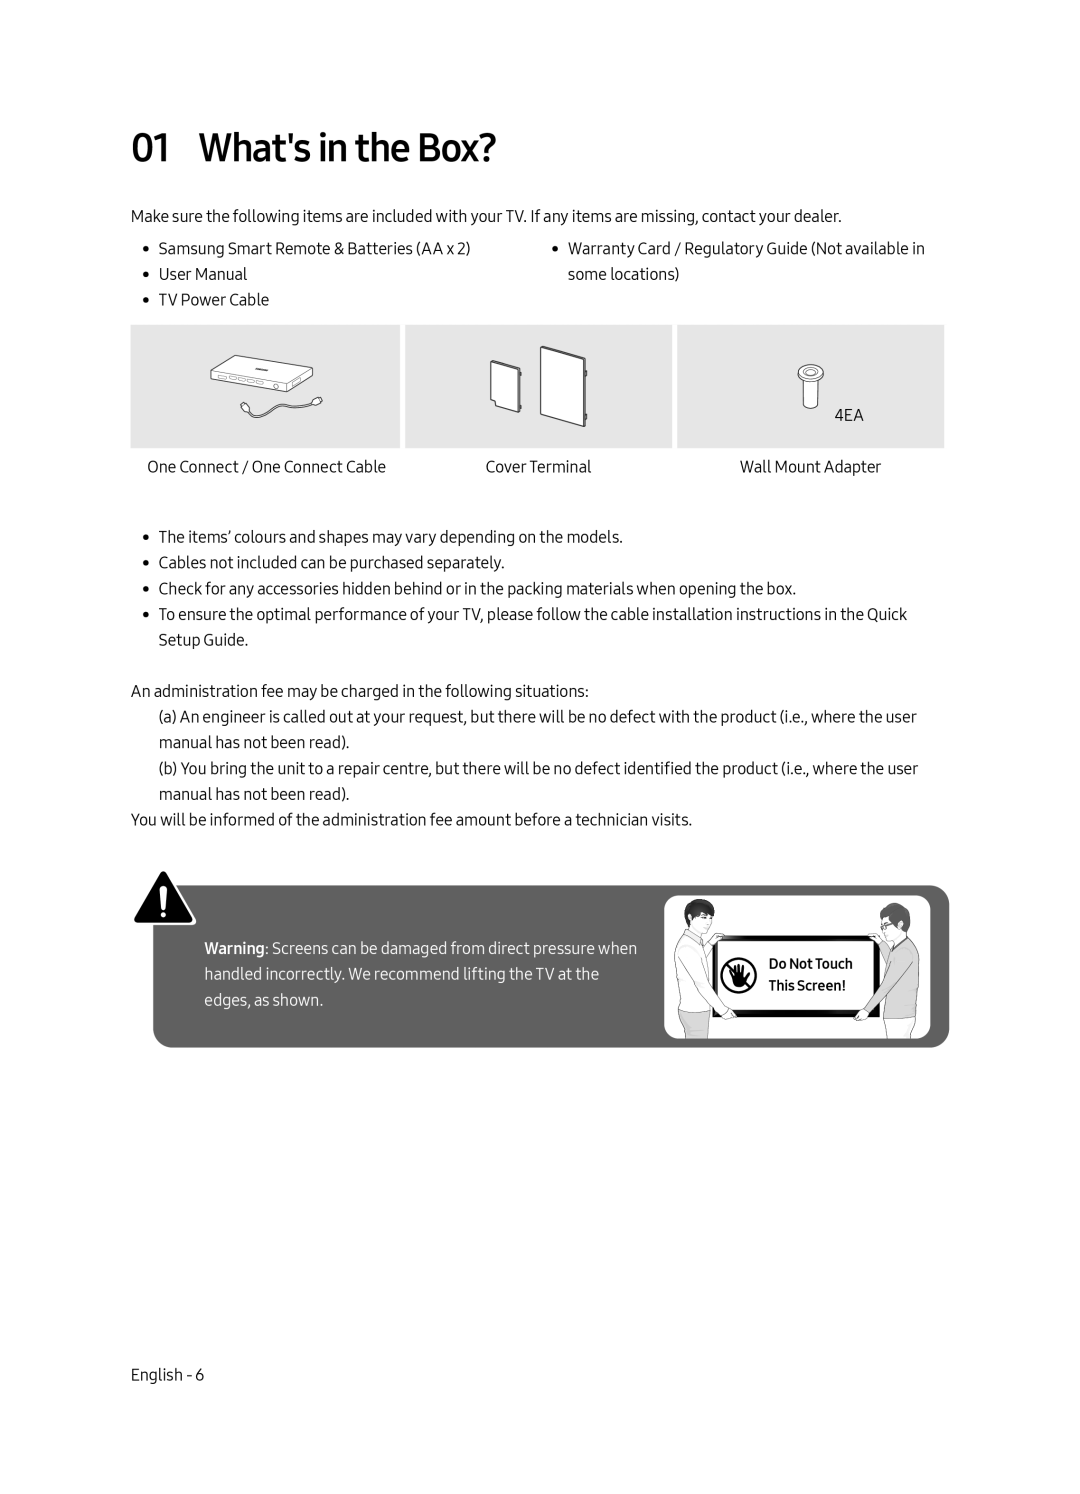 Samsung UE75MU7000TXZG manual Whats in the Box?, Warning Screens can be damaged from direct pressure when, edges, as shown 